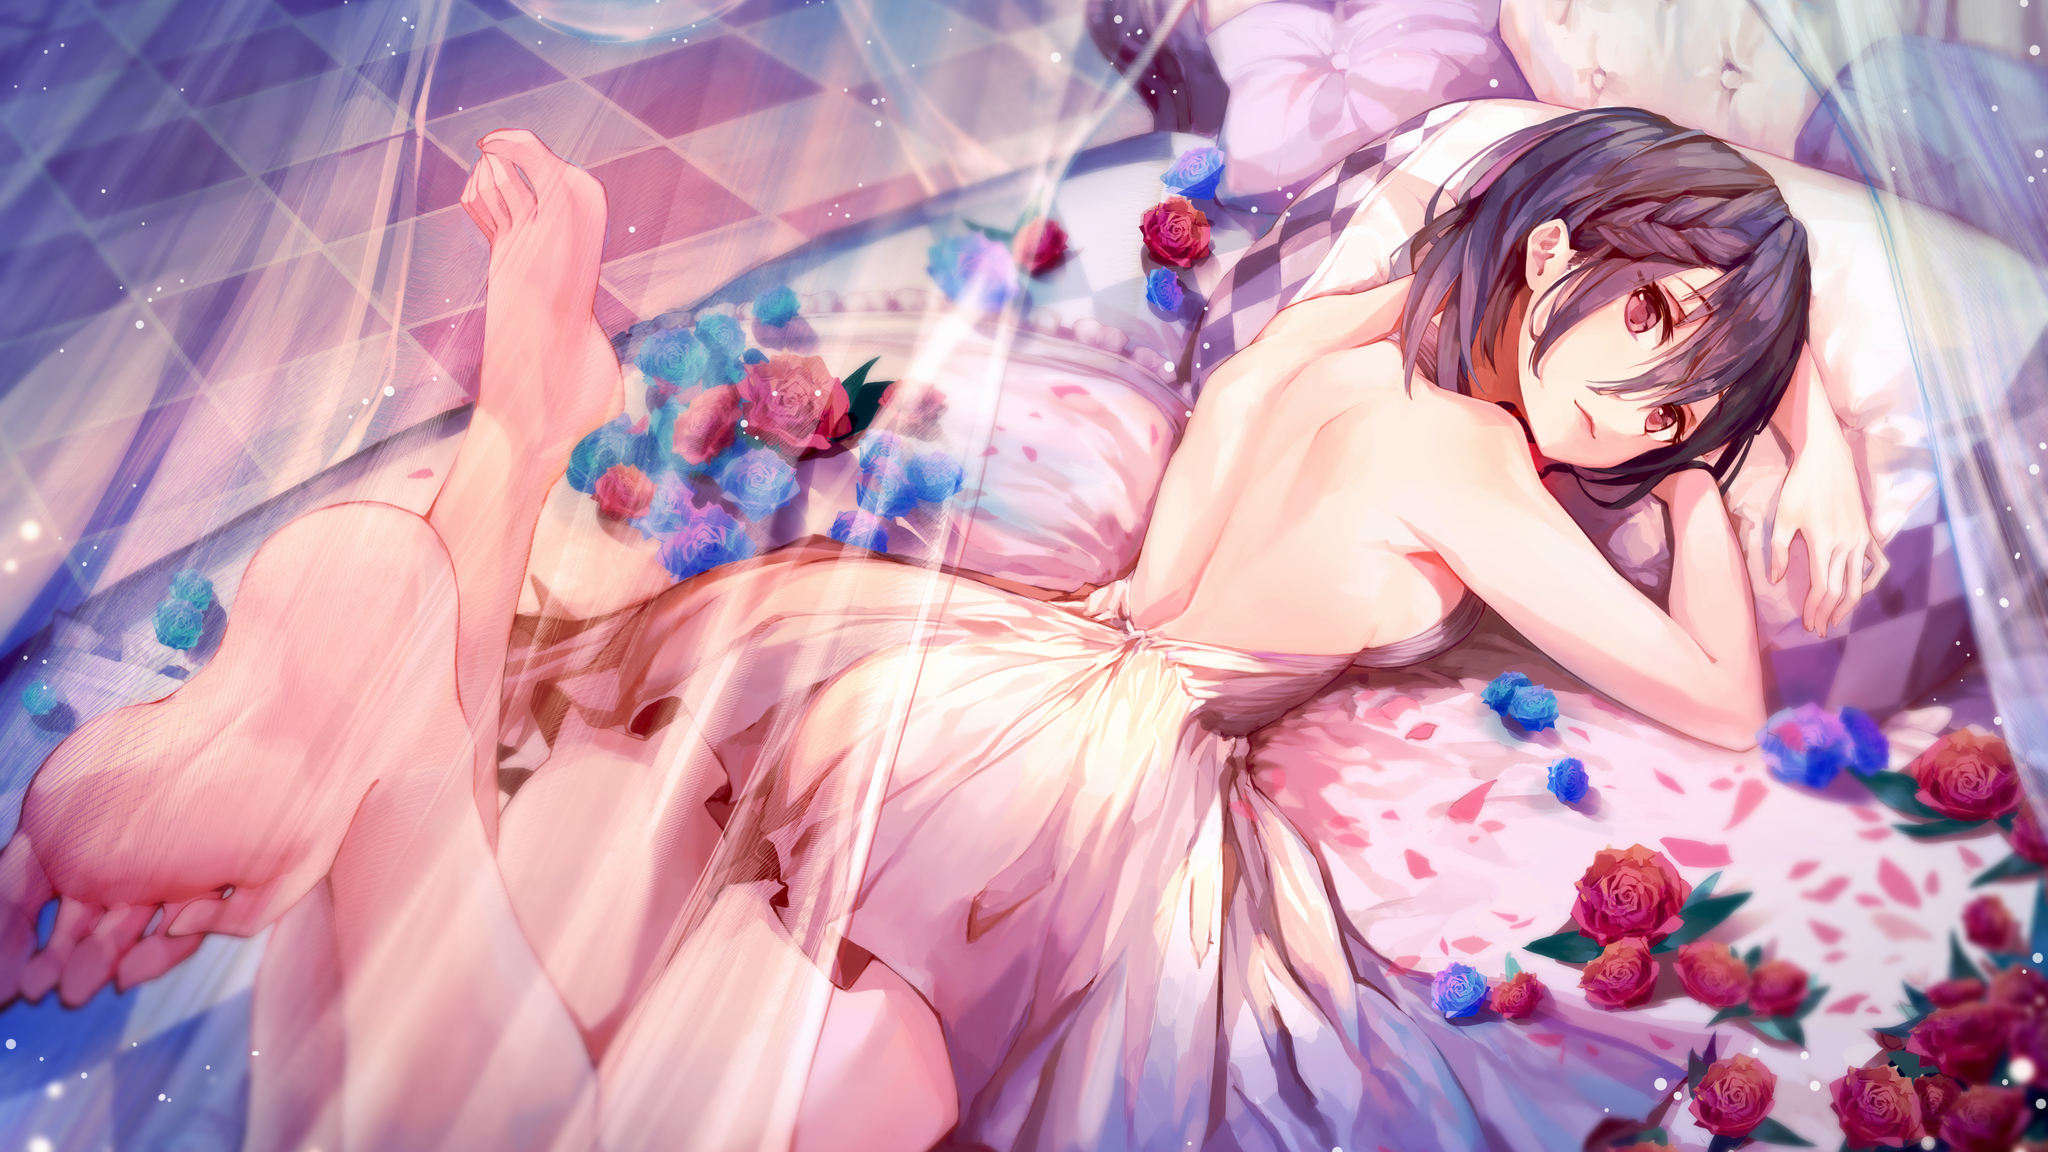 X anime girl bed lying down x resolution hd k wallpapers images backgrounds photos and pictures